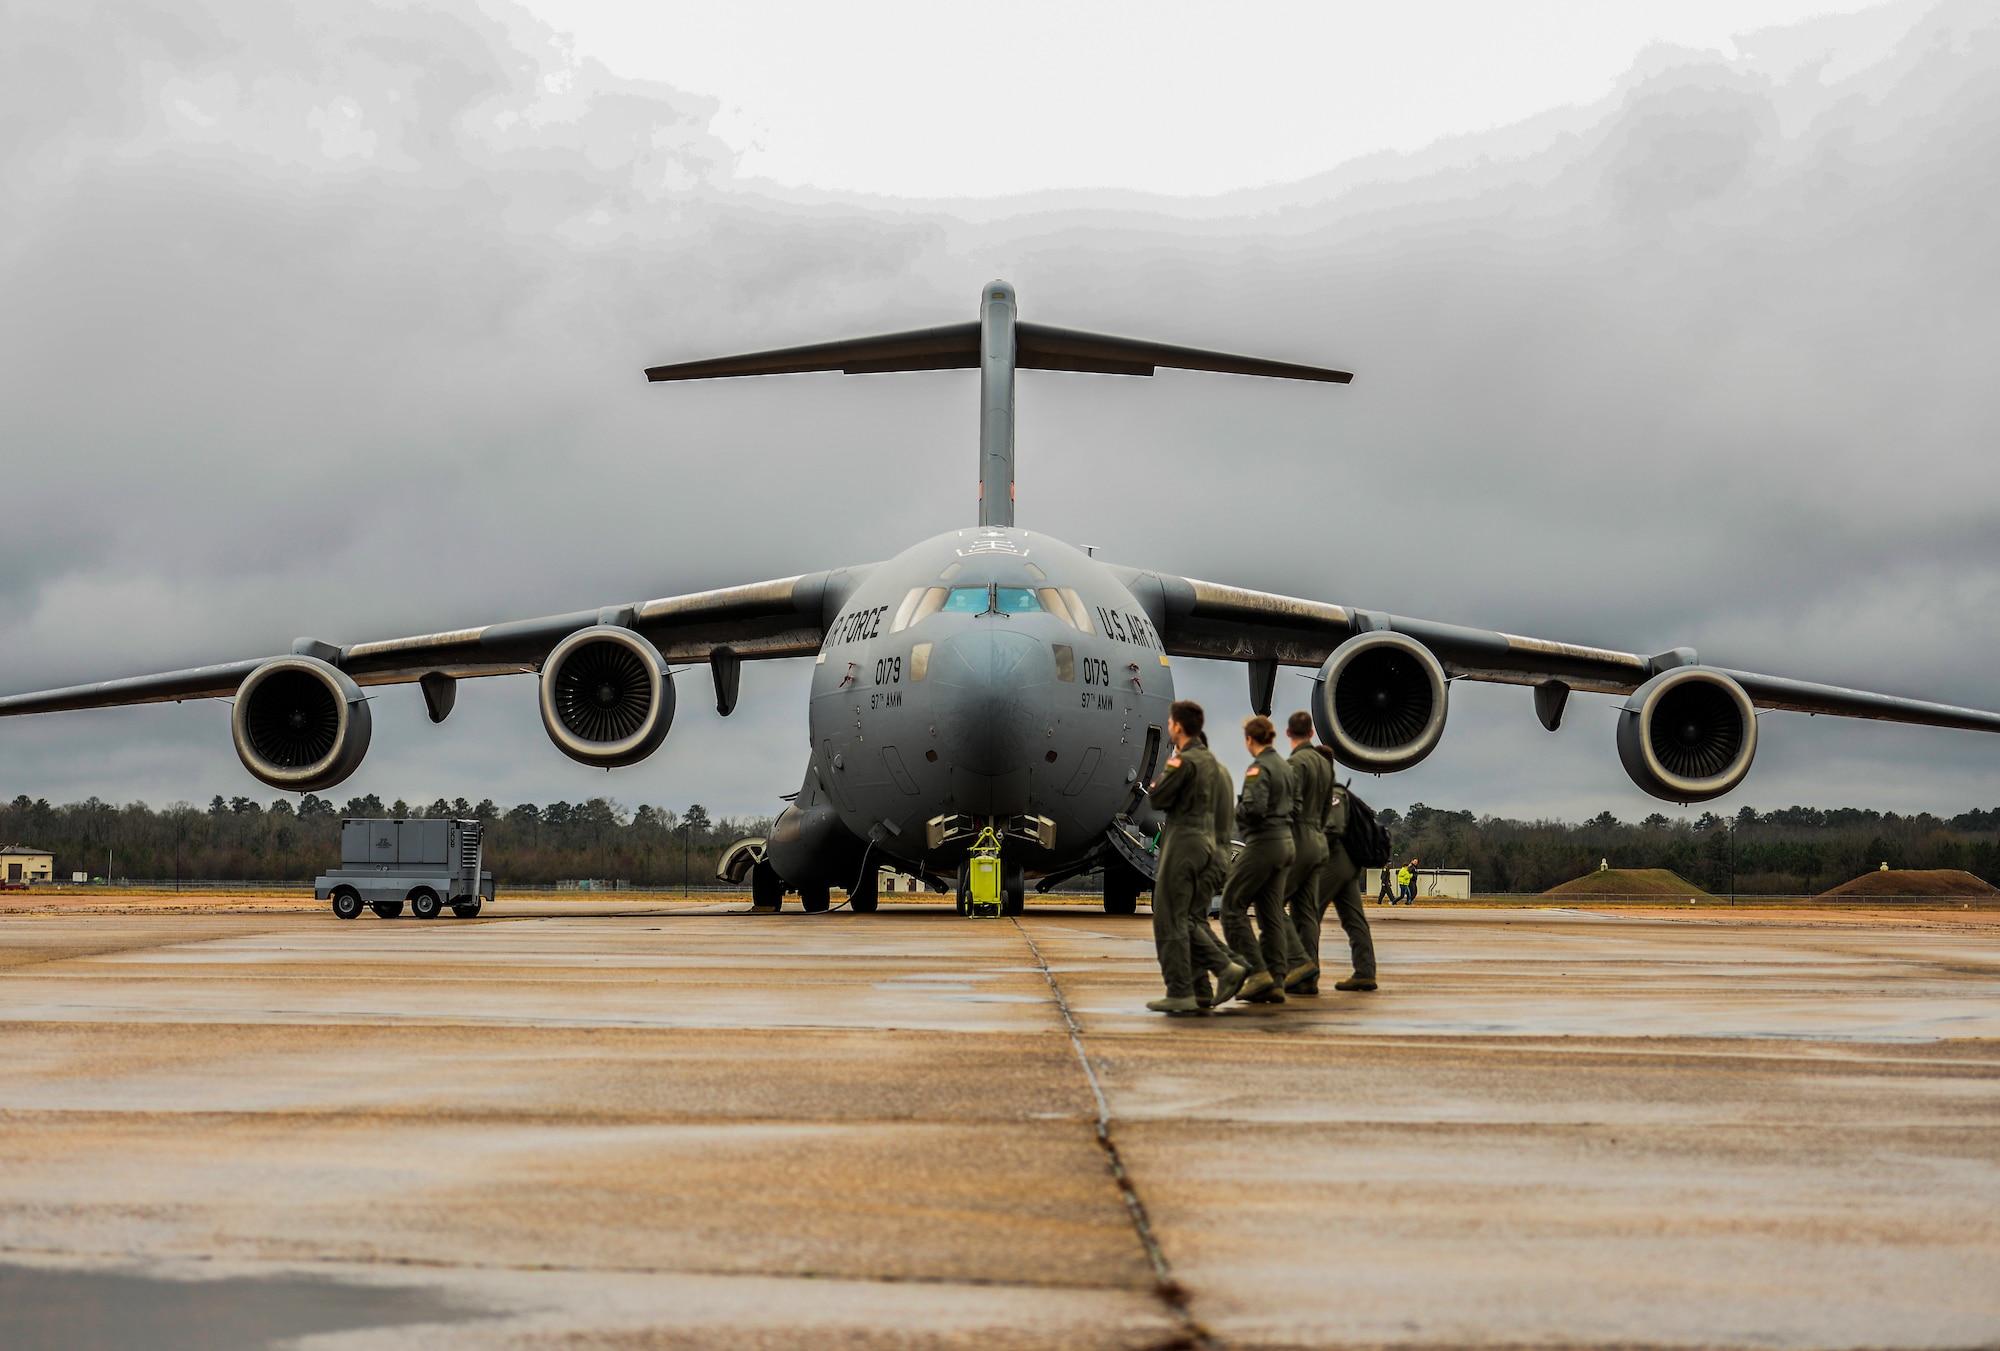 Four Airmen walk in front of a C-17 Globemaster III Dec. 10, 2019, at Columbus Air Force Base, Miss. The C-17 measures 174 feet long (53 meters) with a wingspan of 169 feet, 10 inches (51.75 meters). (U.S. Air Force photo by Airman Davis Donaldson)